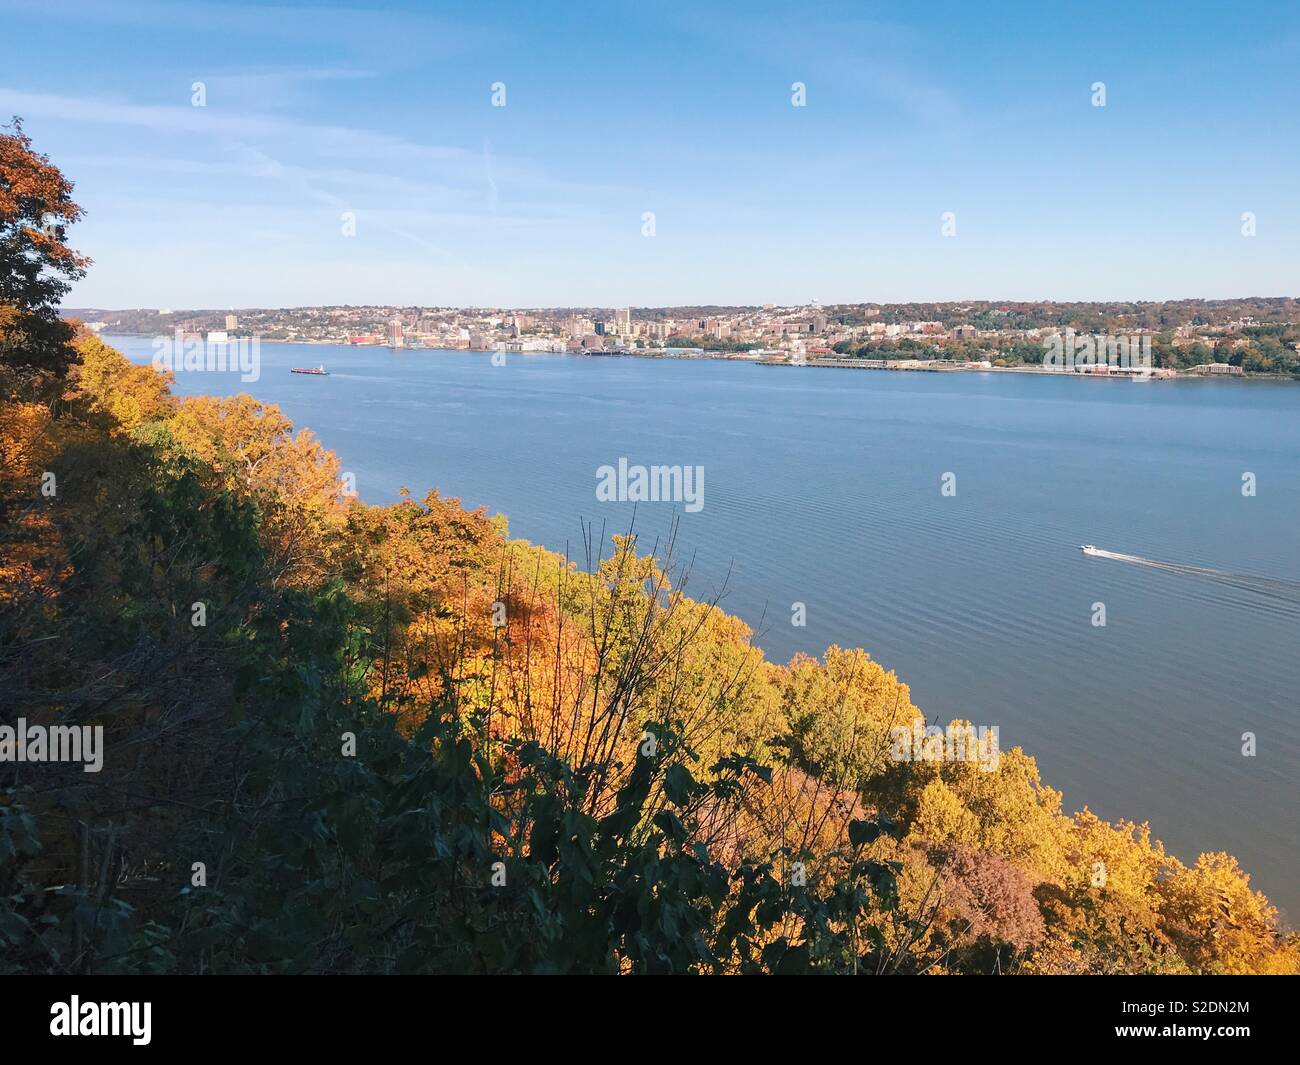 View of Yonkers, NY, and the Hudson River seen from the New Jersey Palisades in fall. Stock Photo